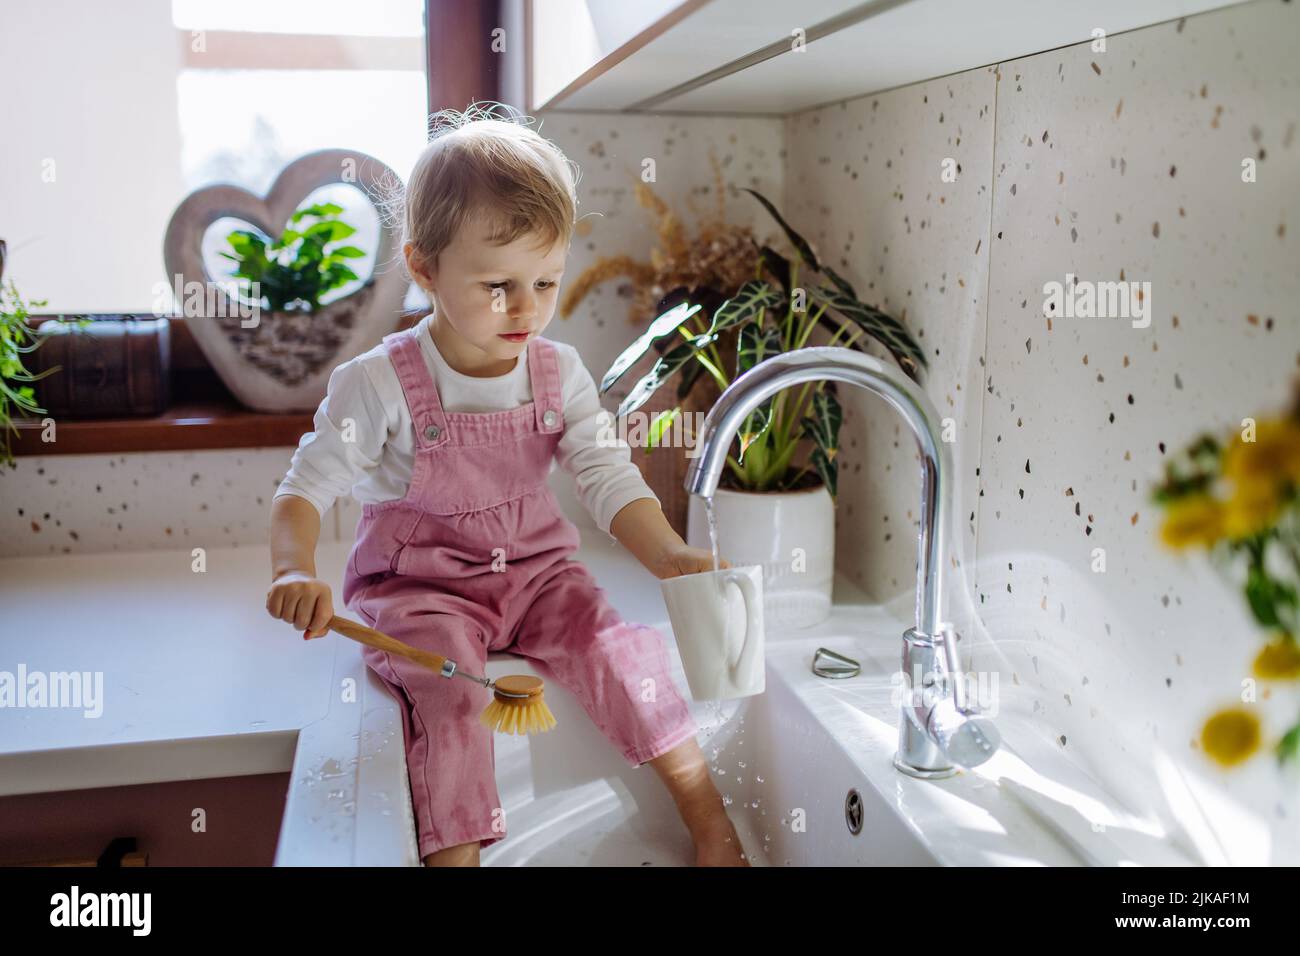 Little girl sitting on kitchen counter and washing cup in sink in kitchen. Stock Photo